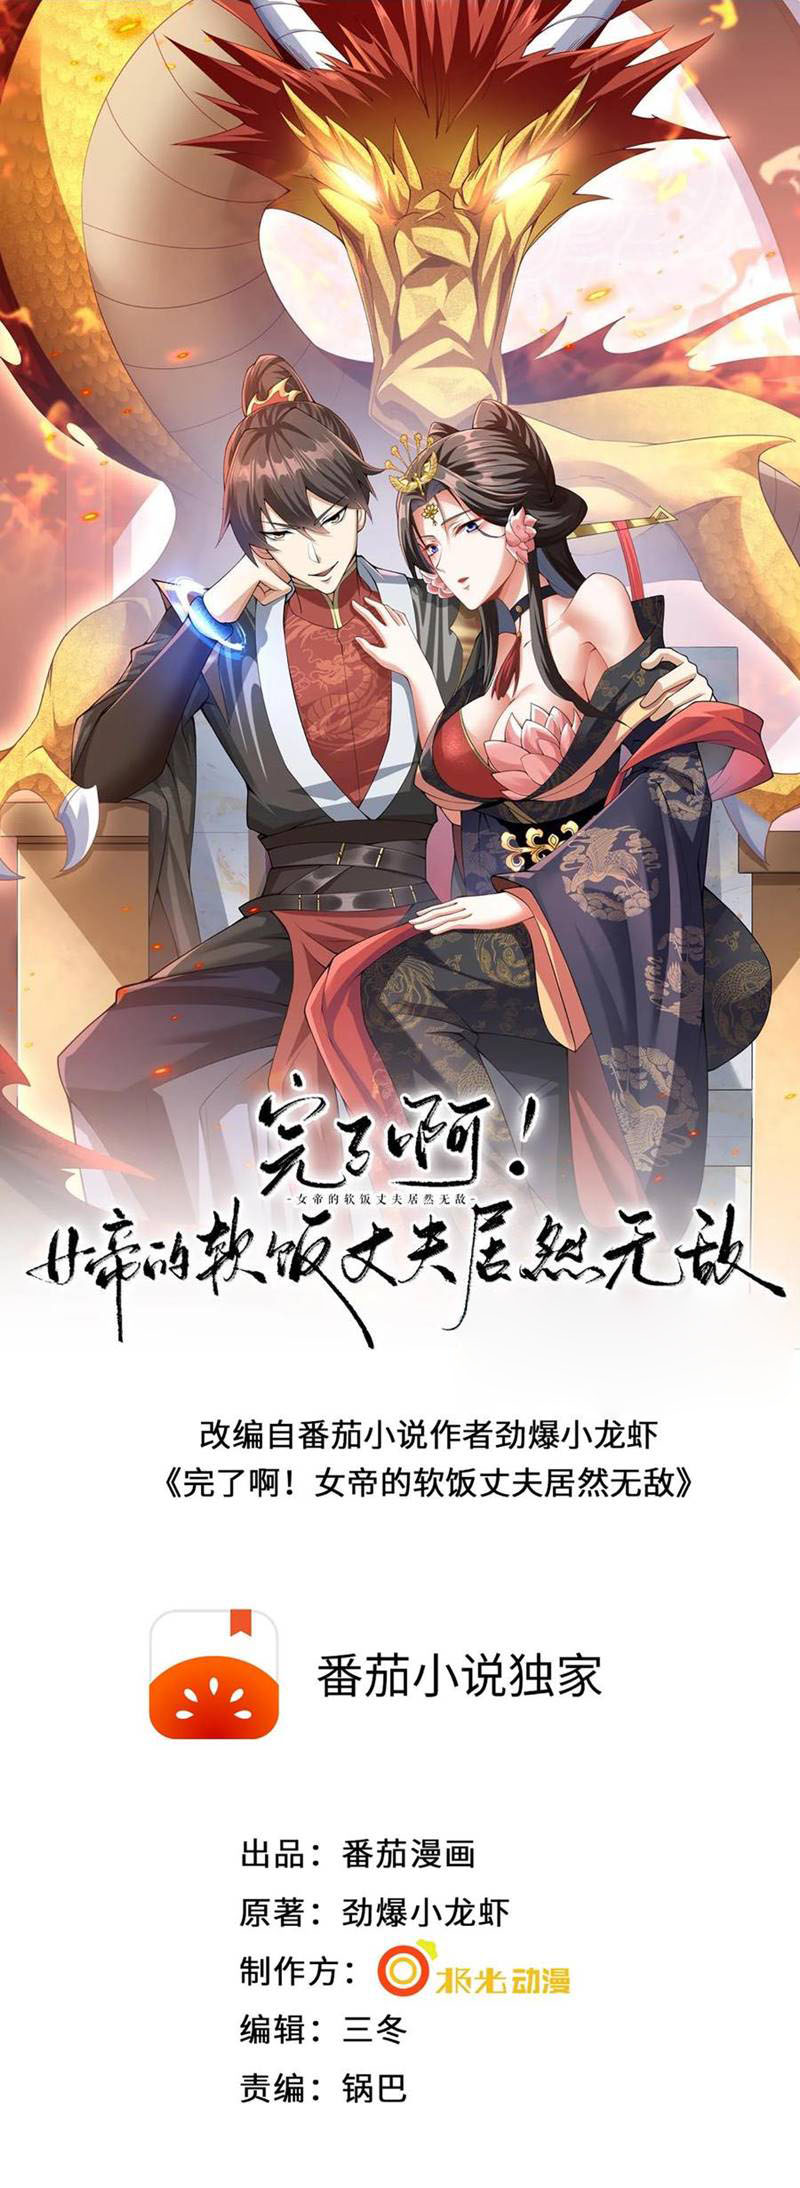 It’s Over! The Queen’s Soft Rice Husband is Actually Invincible Chapter 7